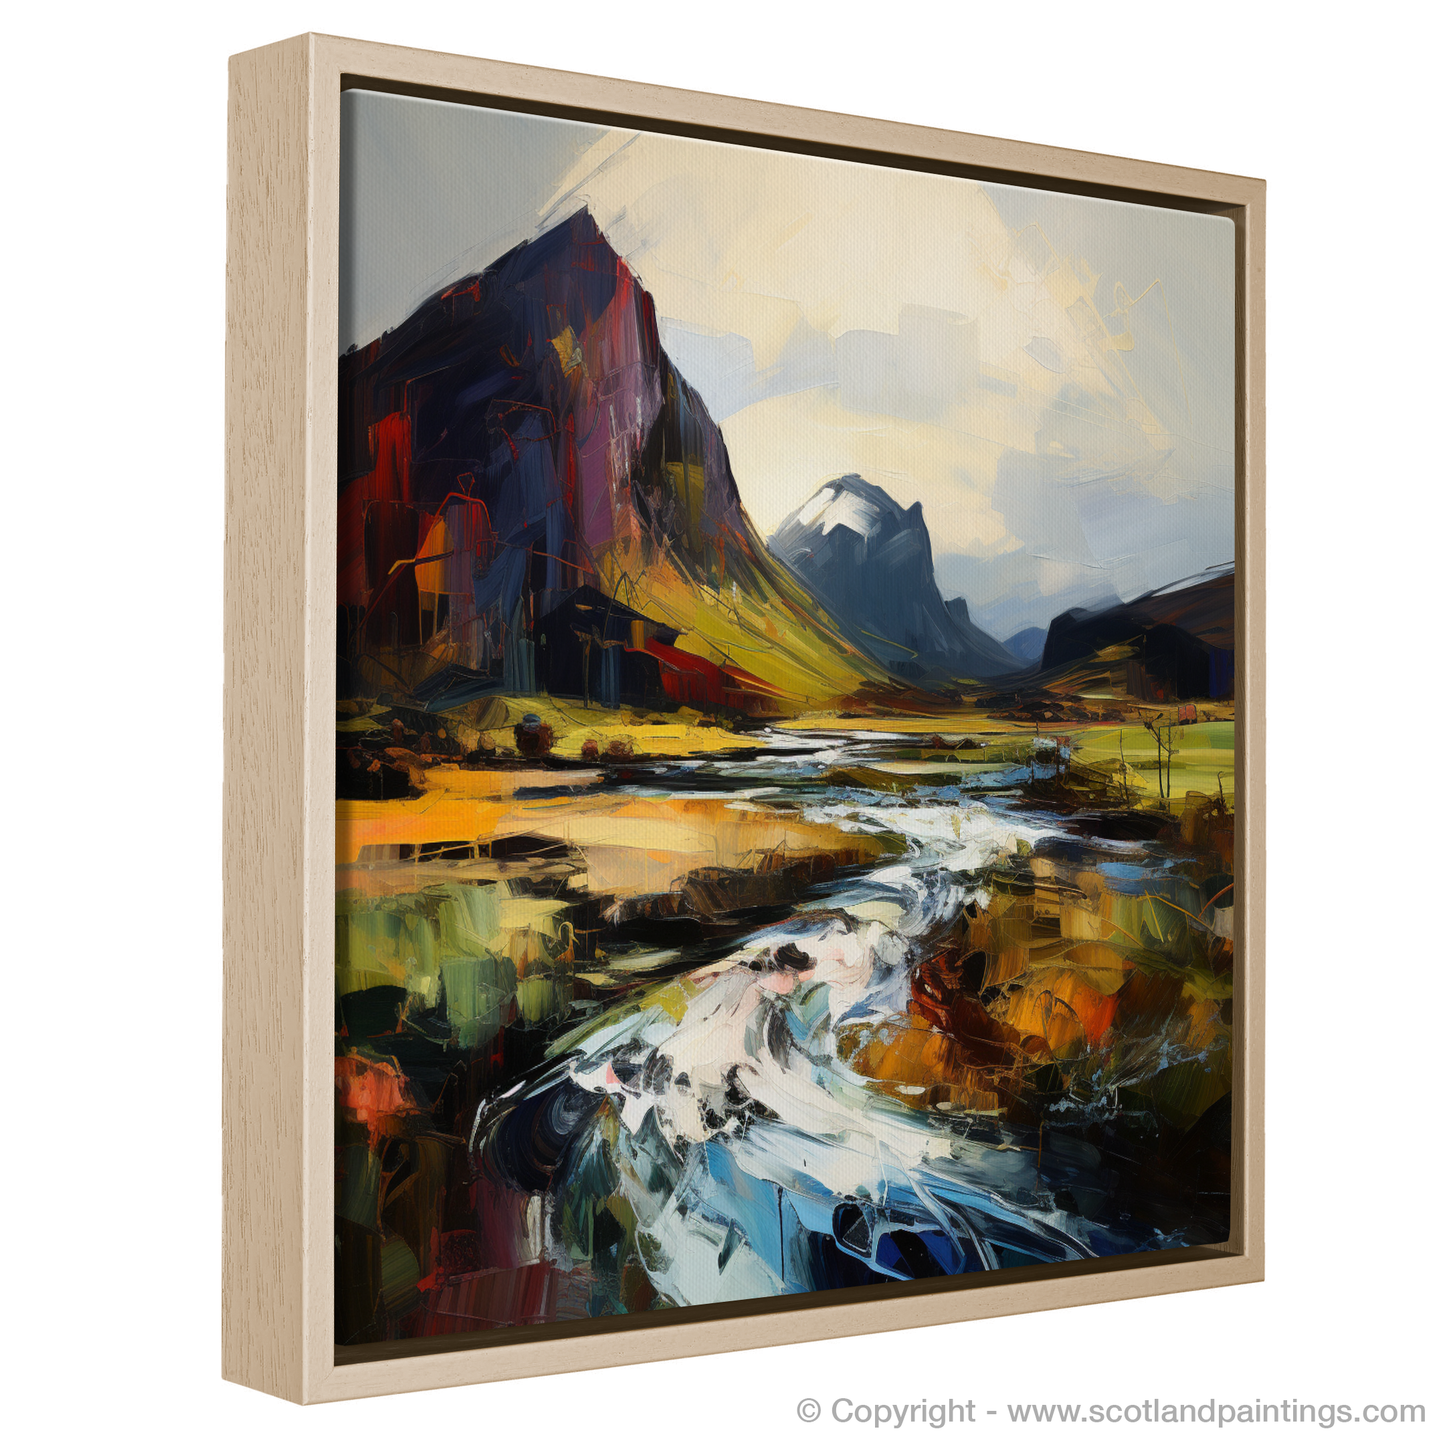 Painting and Art Print of Cruach Àrdrain entitled "Wild Essence of Cruach Àrdrain: An Expressionist Homage to Scotland's Highlands".